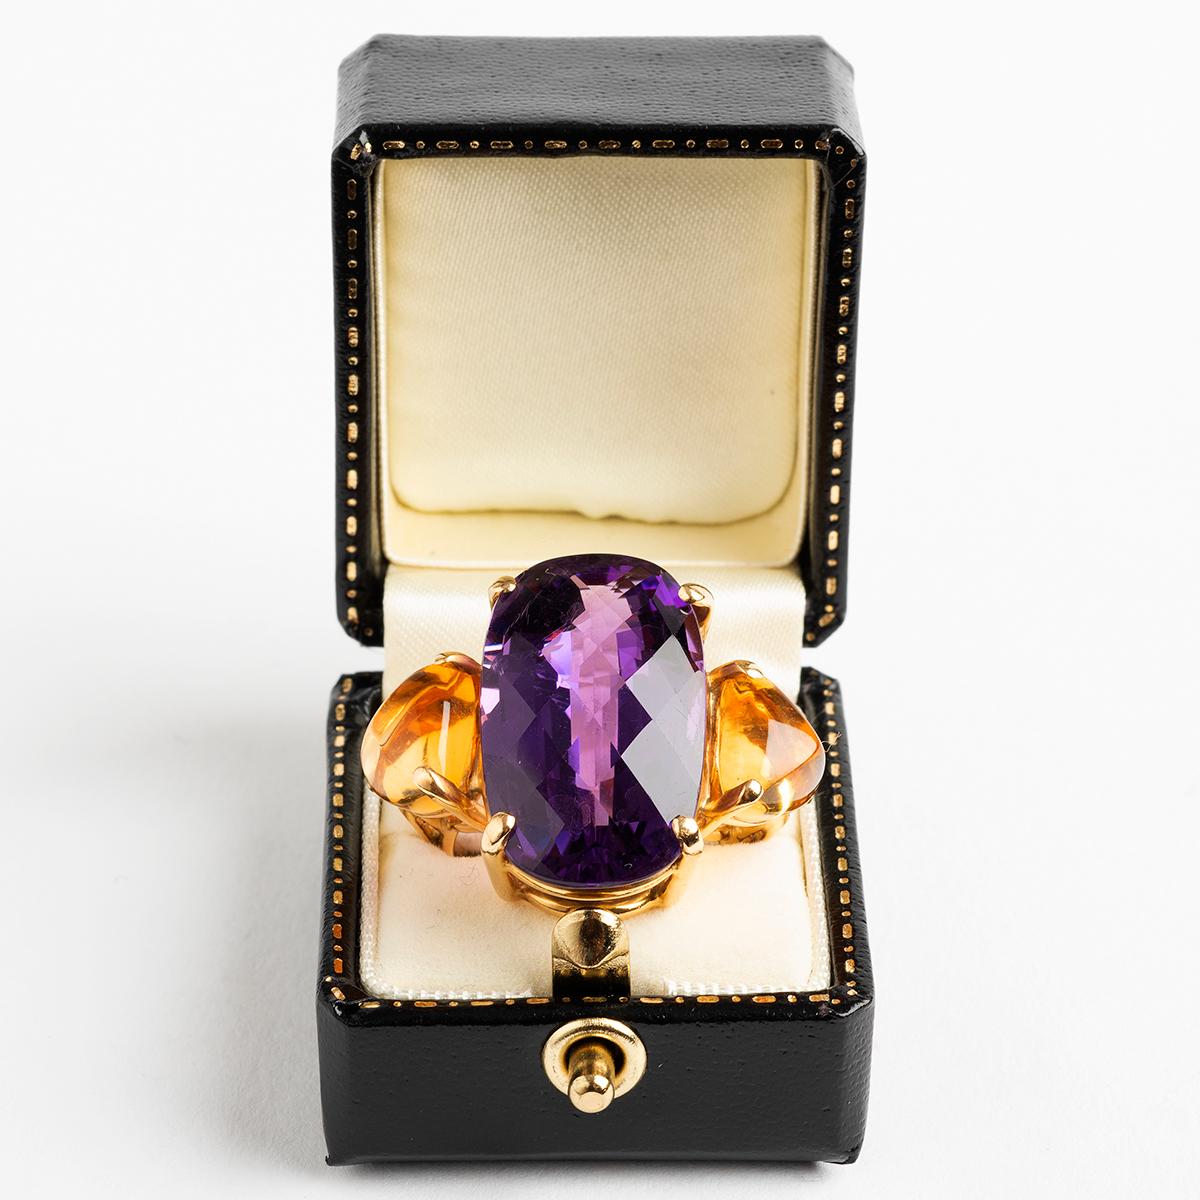 A unique and stunning statement piece, which we date to circa 1960s, and truly evoking the period, our large and notable dress ring in 18k yellow gold features a prominent rose cut amethyst and citrine stones. A worthy addition to any quality